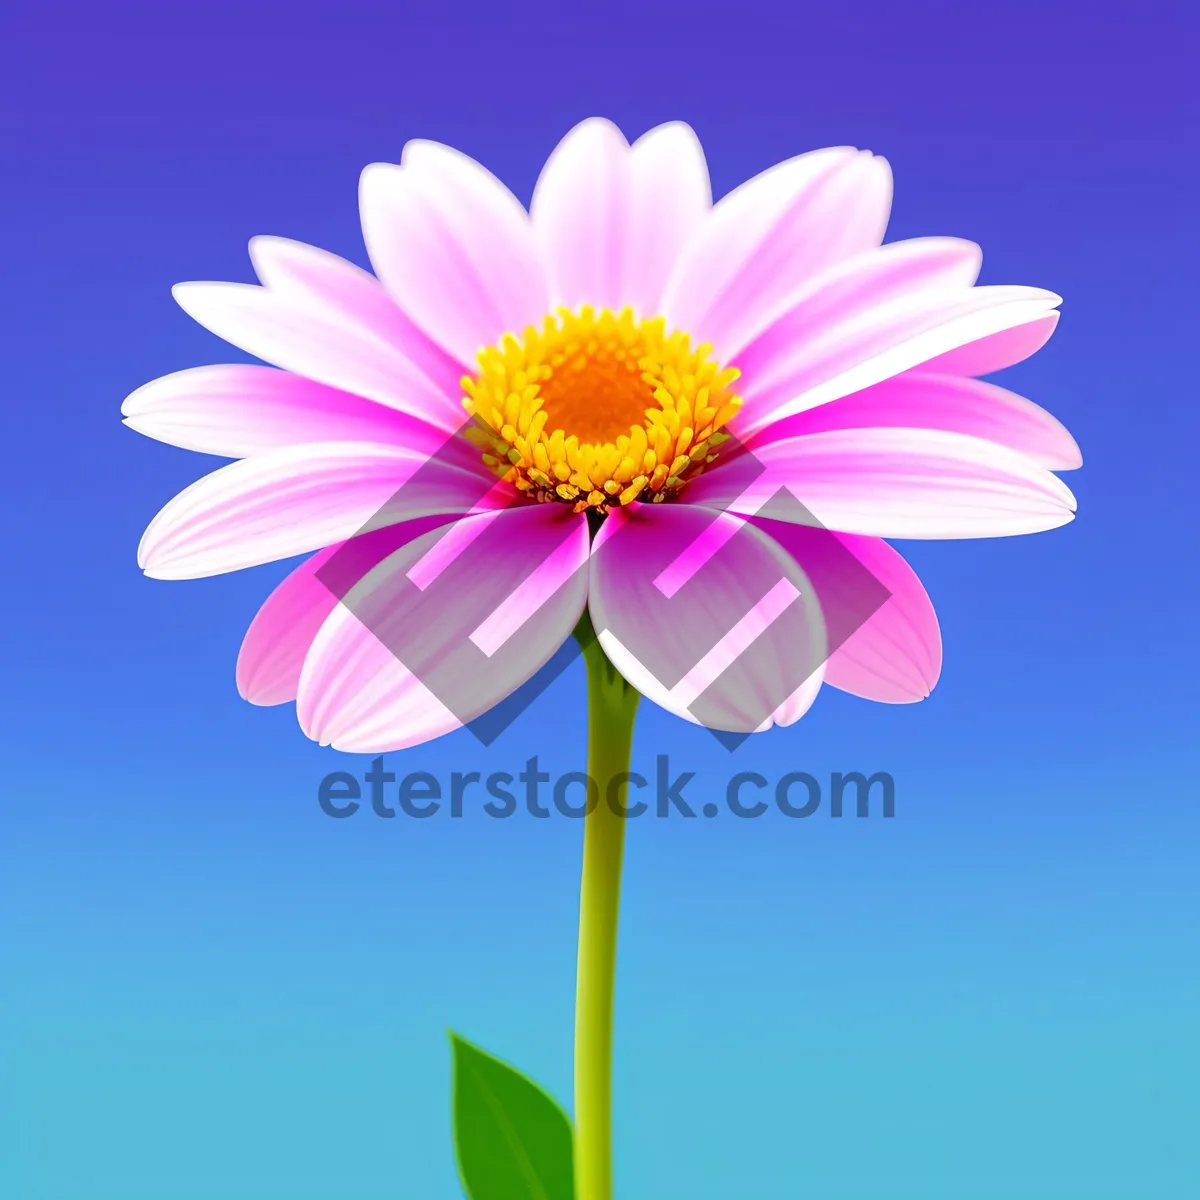 Picture of Pink Petal Bloom: A Vibrant Floral Delight